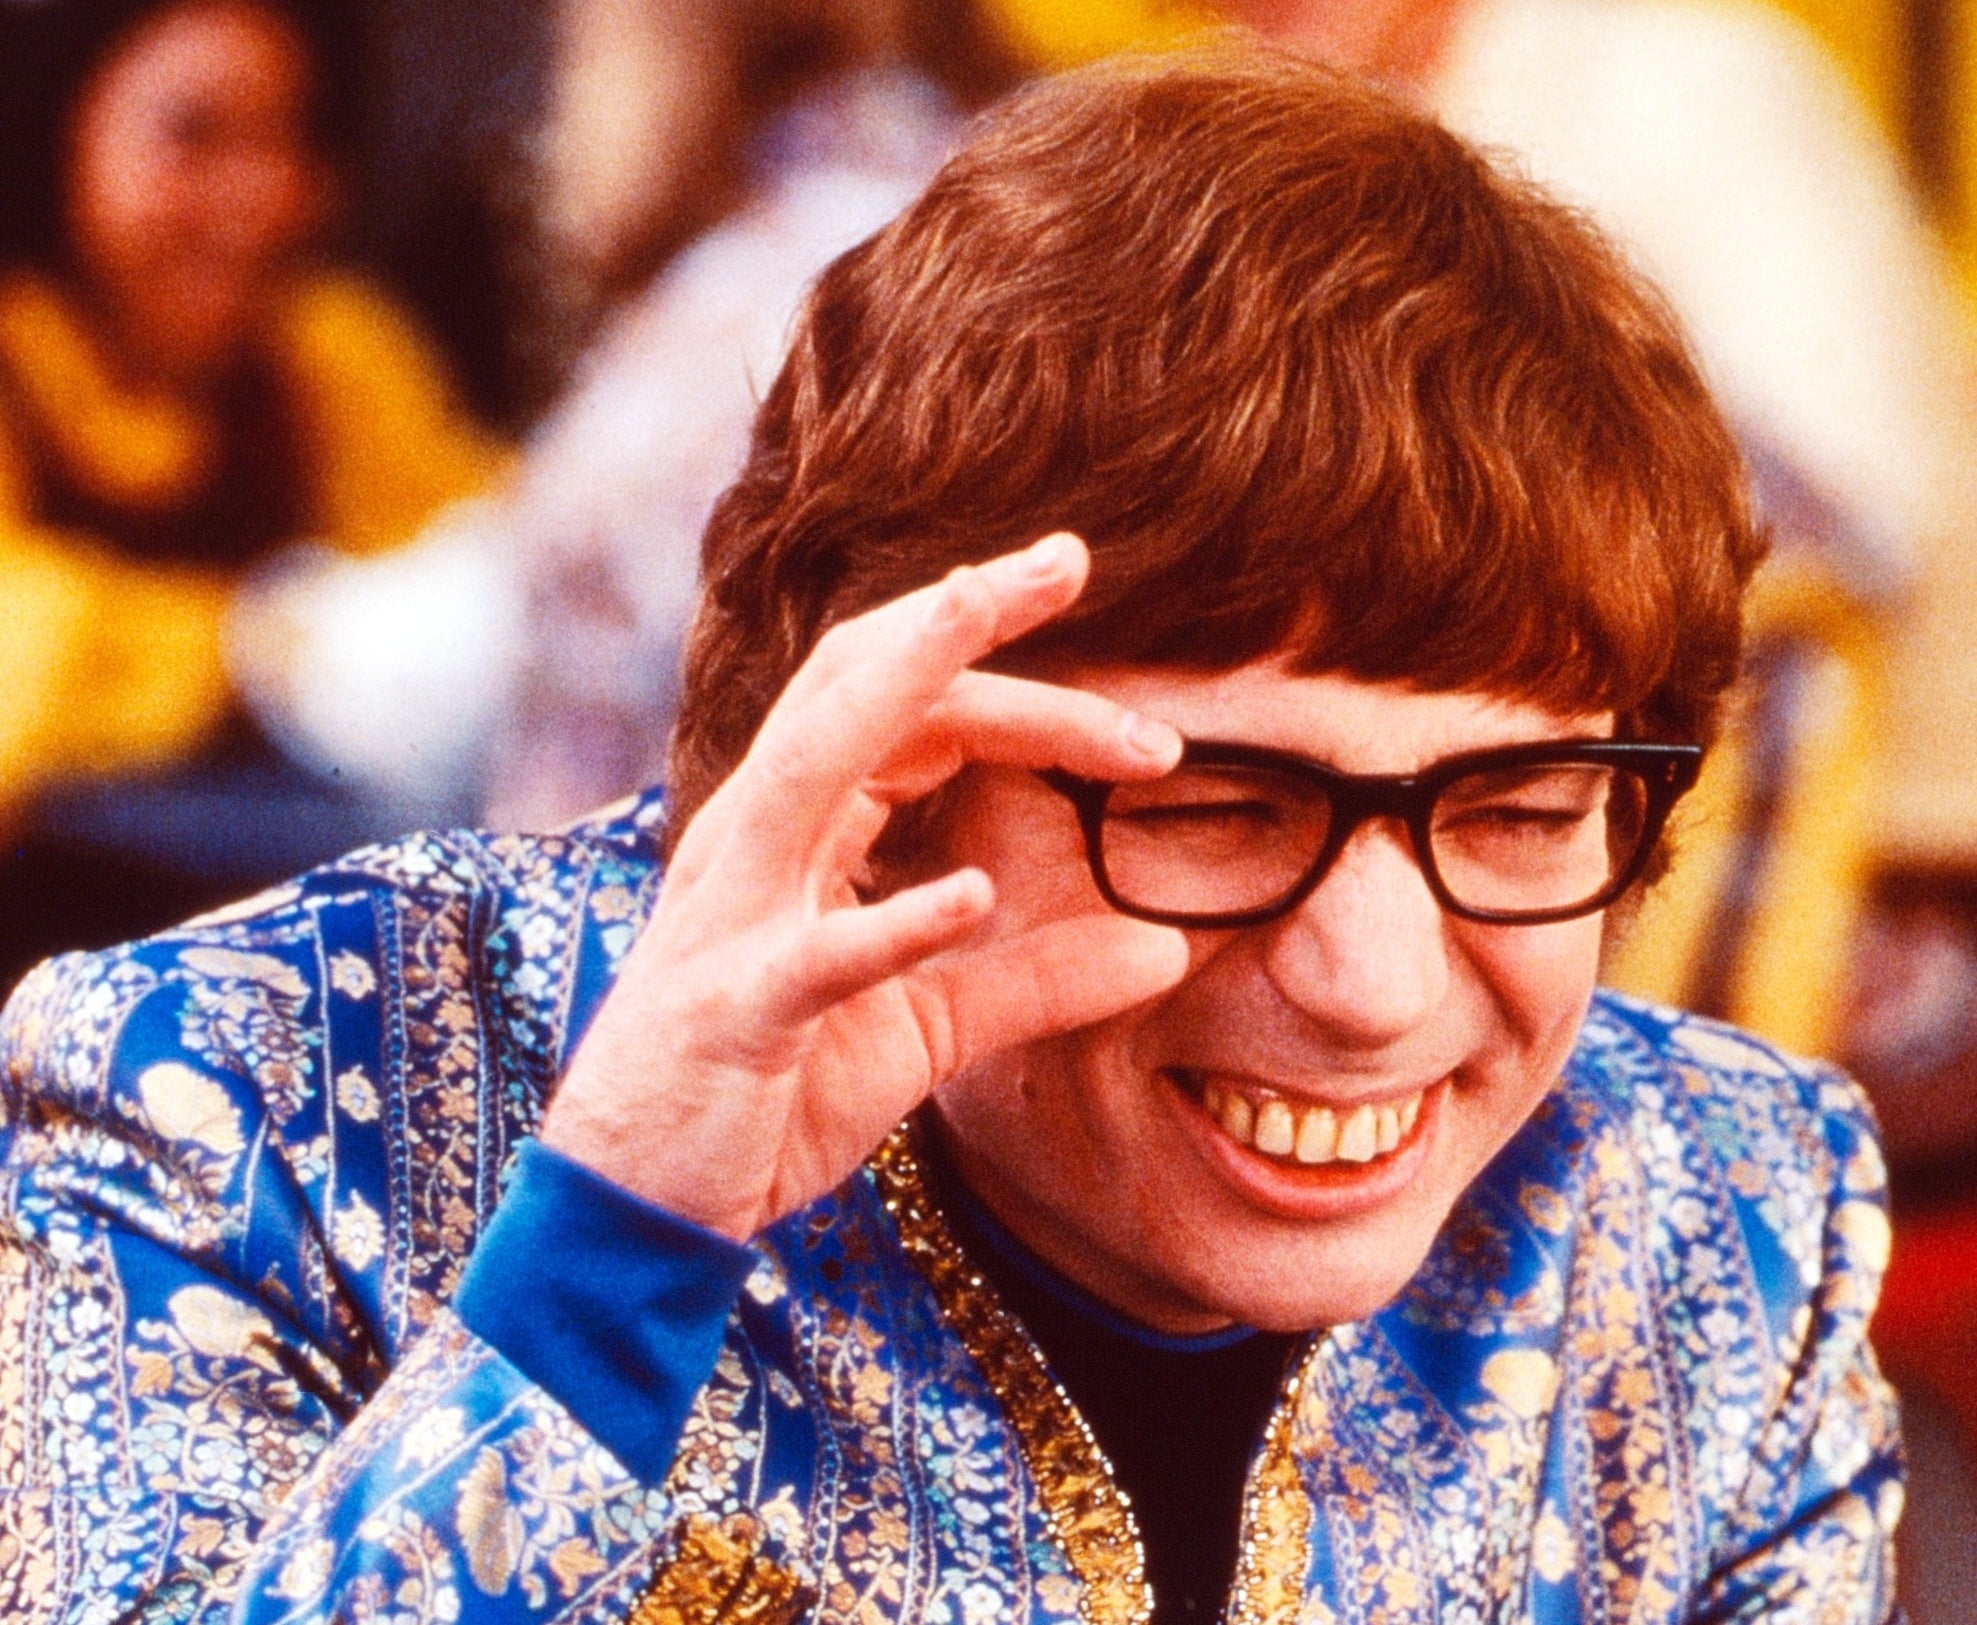 Person in a patterned blue outfit with glasses making a hand gesture near eyes